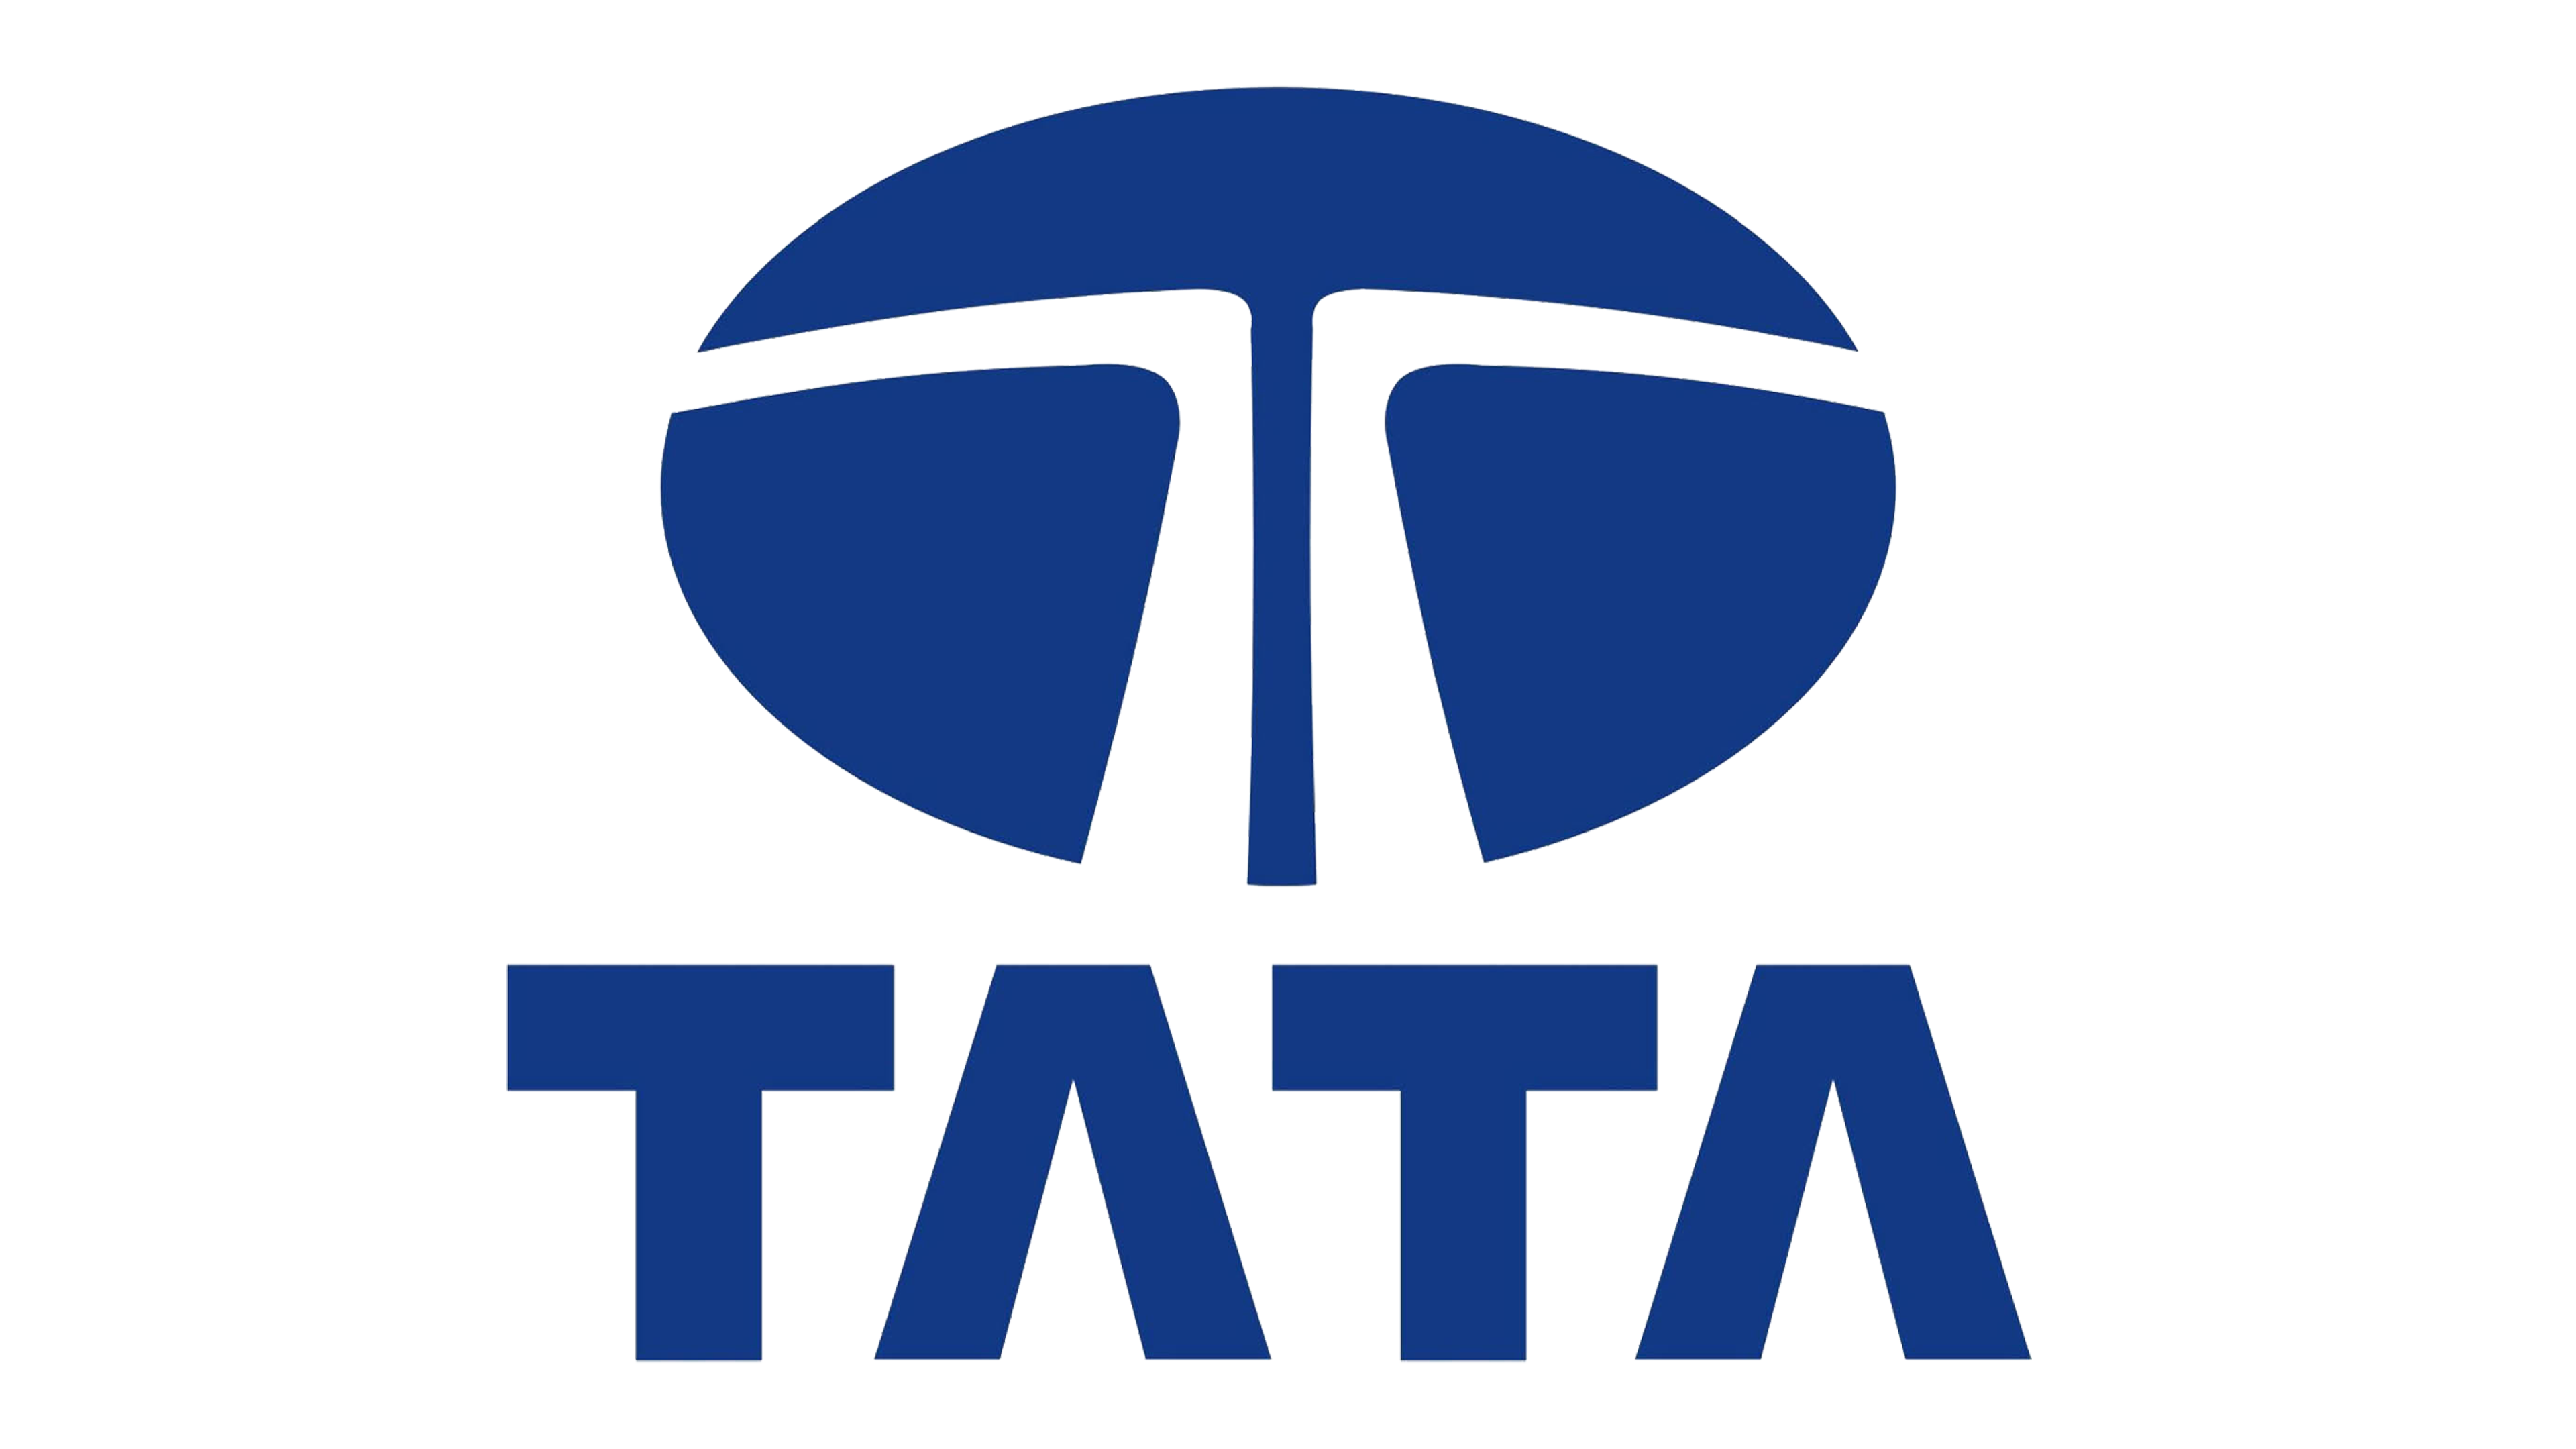 Tata is most valuable brand in India; RIL, Airtel ranked No 2, 3 - The  Hindu BusinessLine